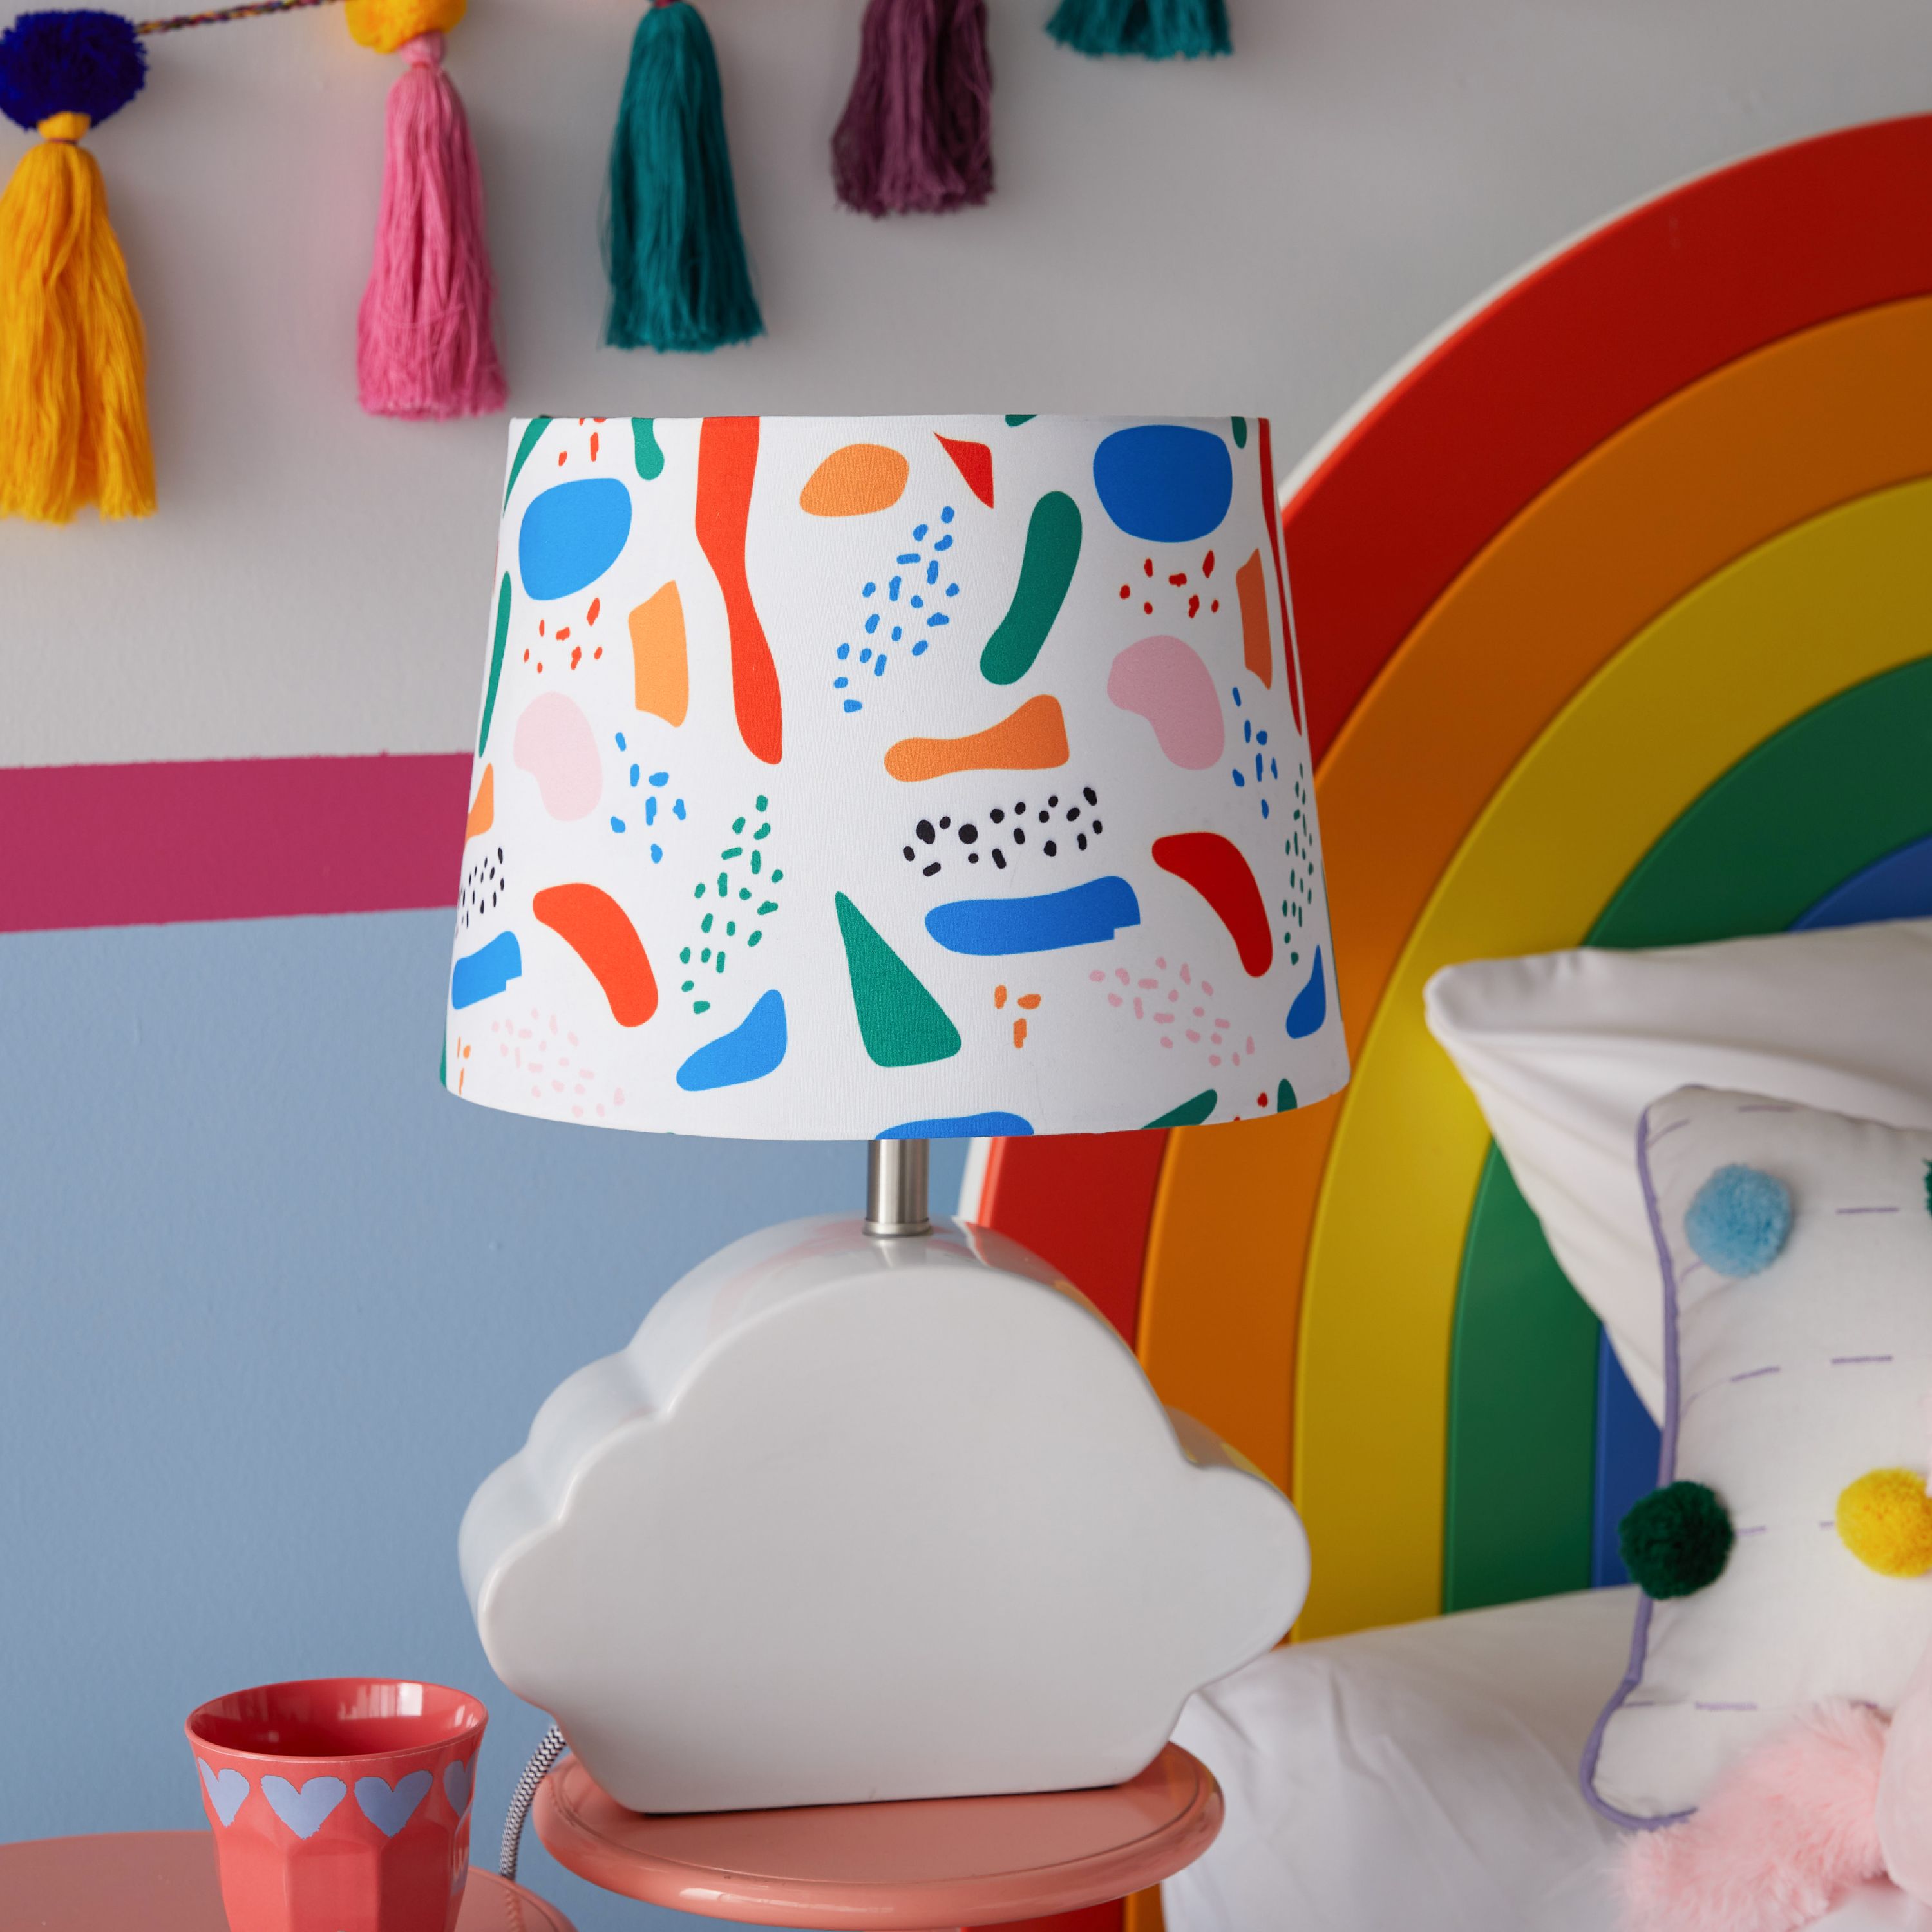 Abstract Shapes Shade with Ceramic Cloud Shaped Base by Drew Barrymore Flower Kids - image 2 of 10